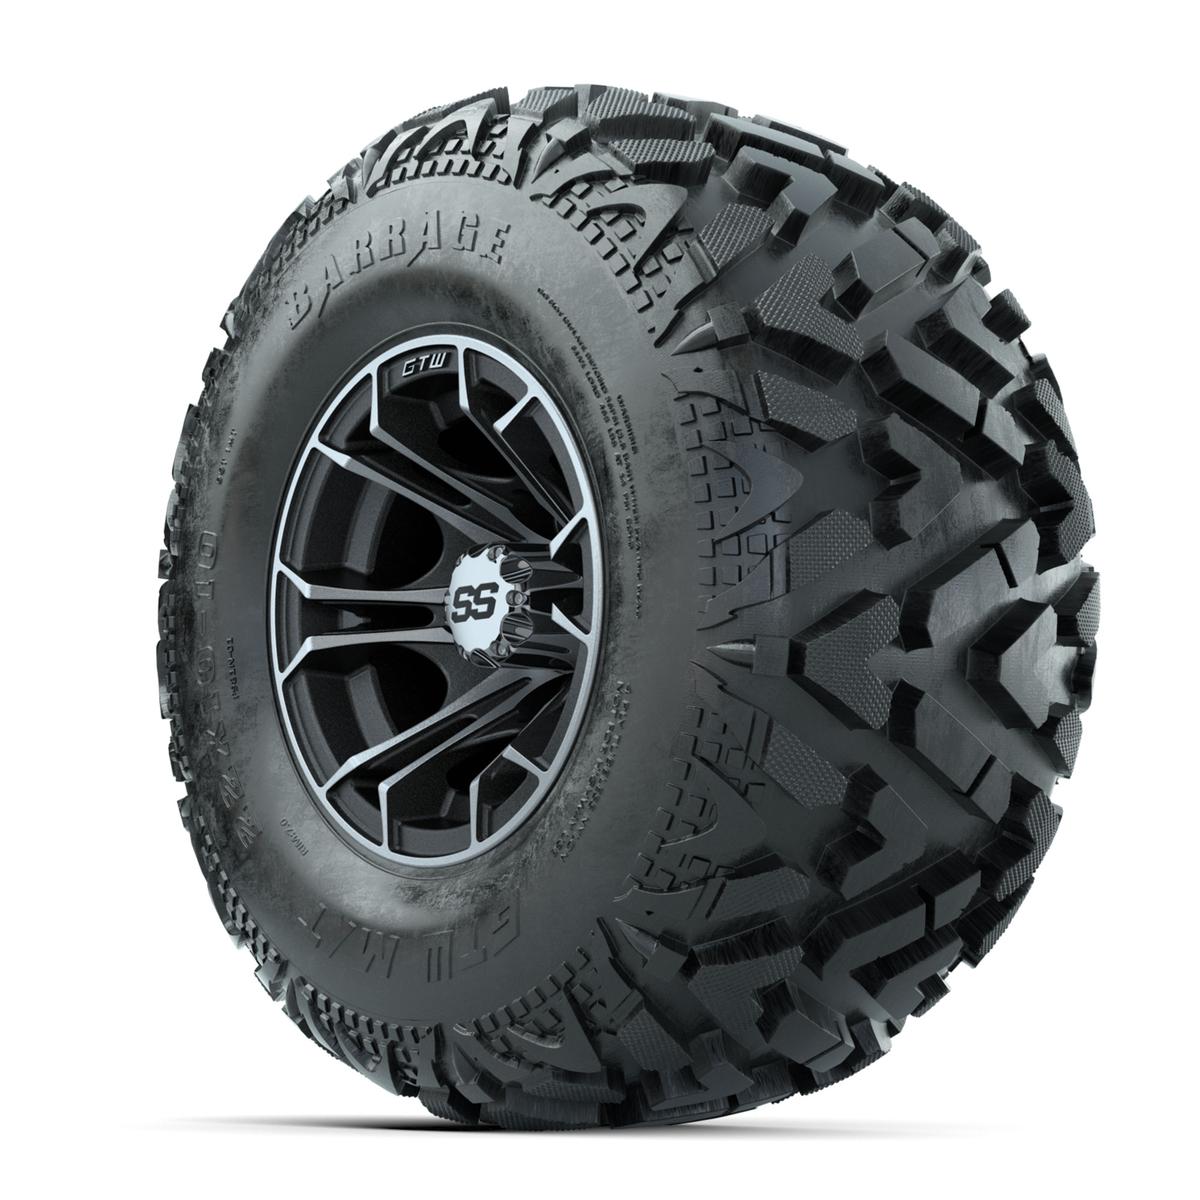 GTW Spyder Machined/Matte Grey 10 in Wheels with 22x10-10 Barrage Mud Tires – Full Set